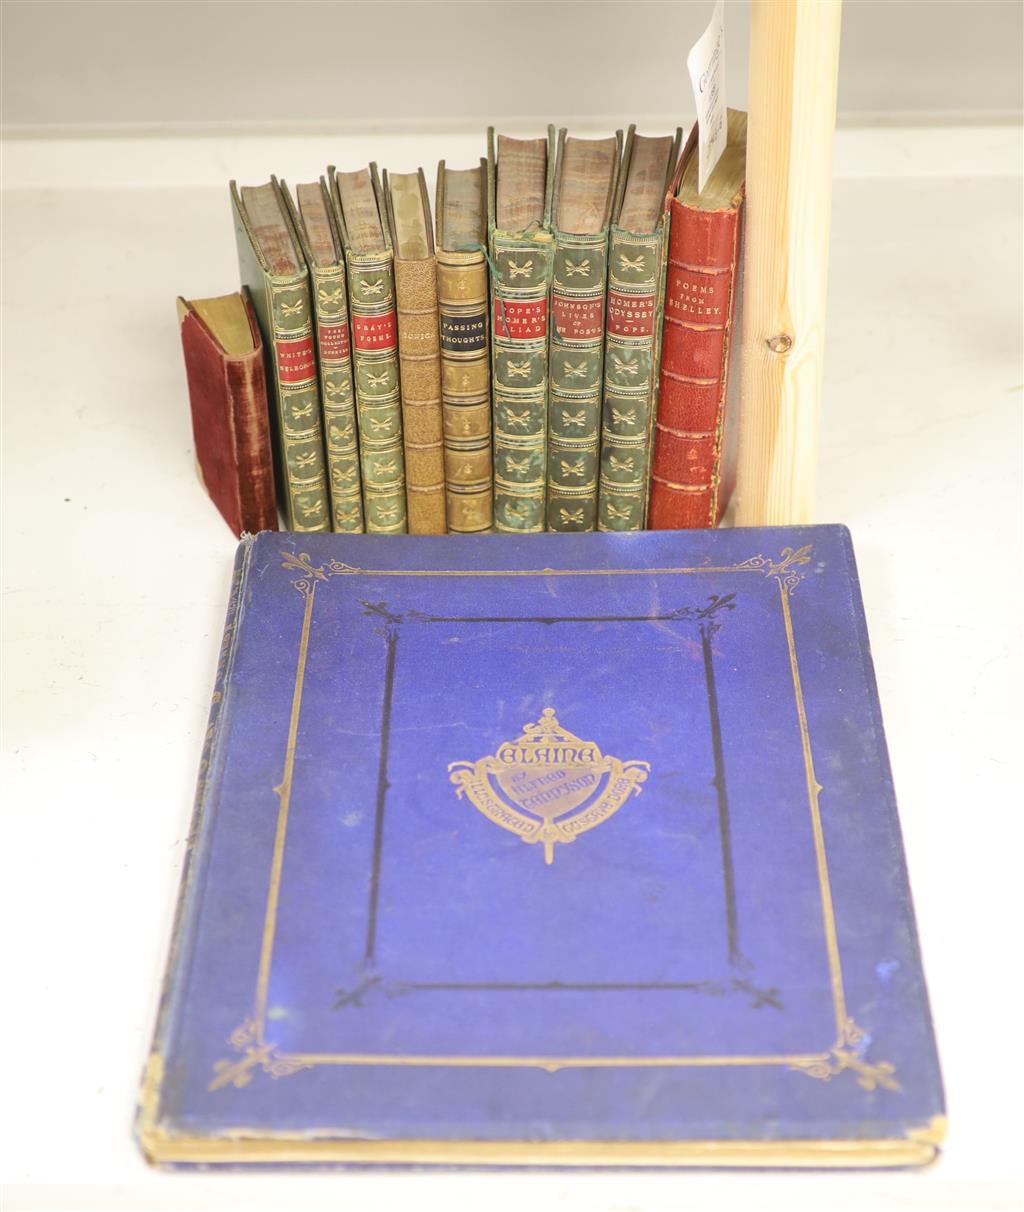 Various leather-bound volumes and a Gustav Dore illustrated book